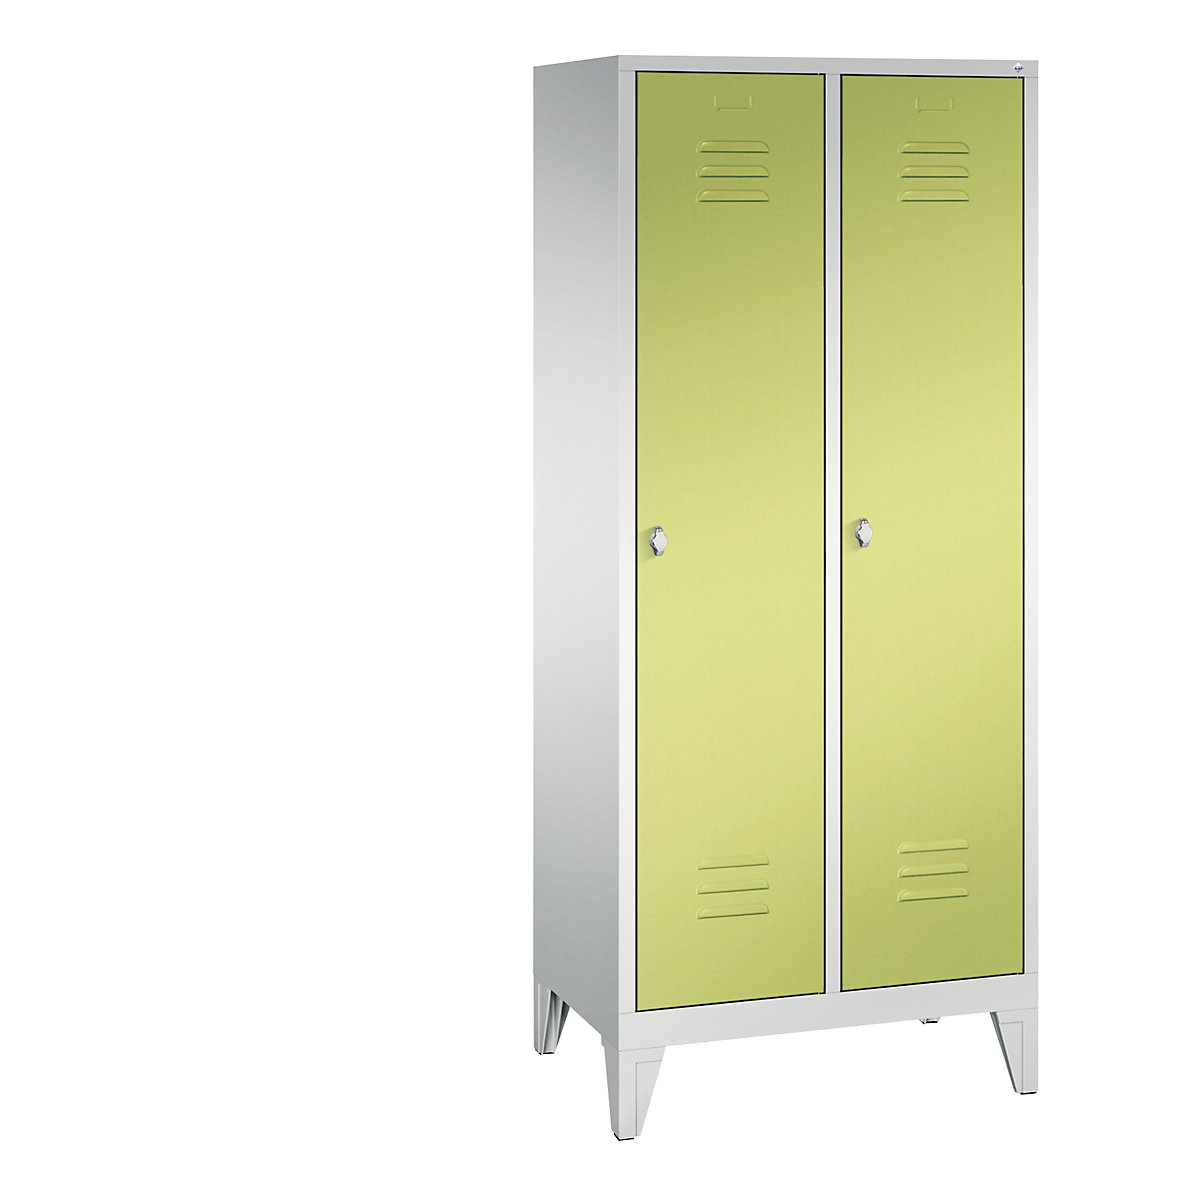 CLASSIC cloakroom locker with feet – C+P, 2 compartments, compartment width 400 mm, light grey / viridian green-3